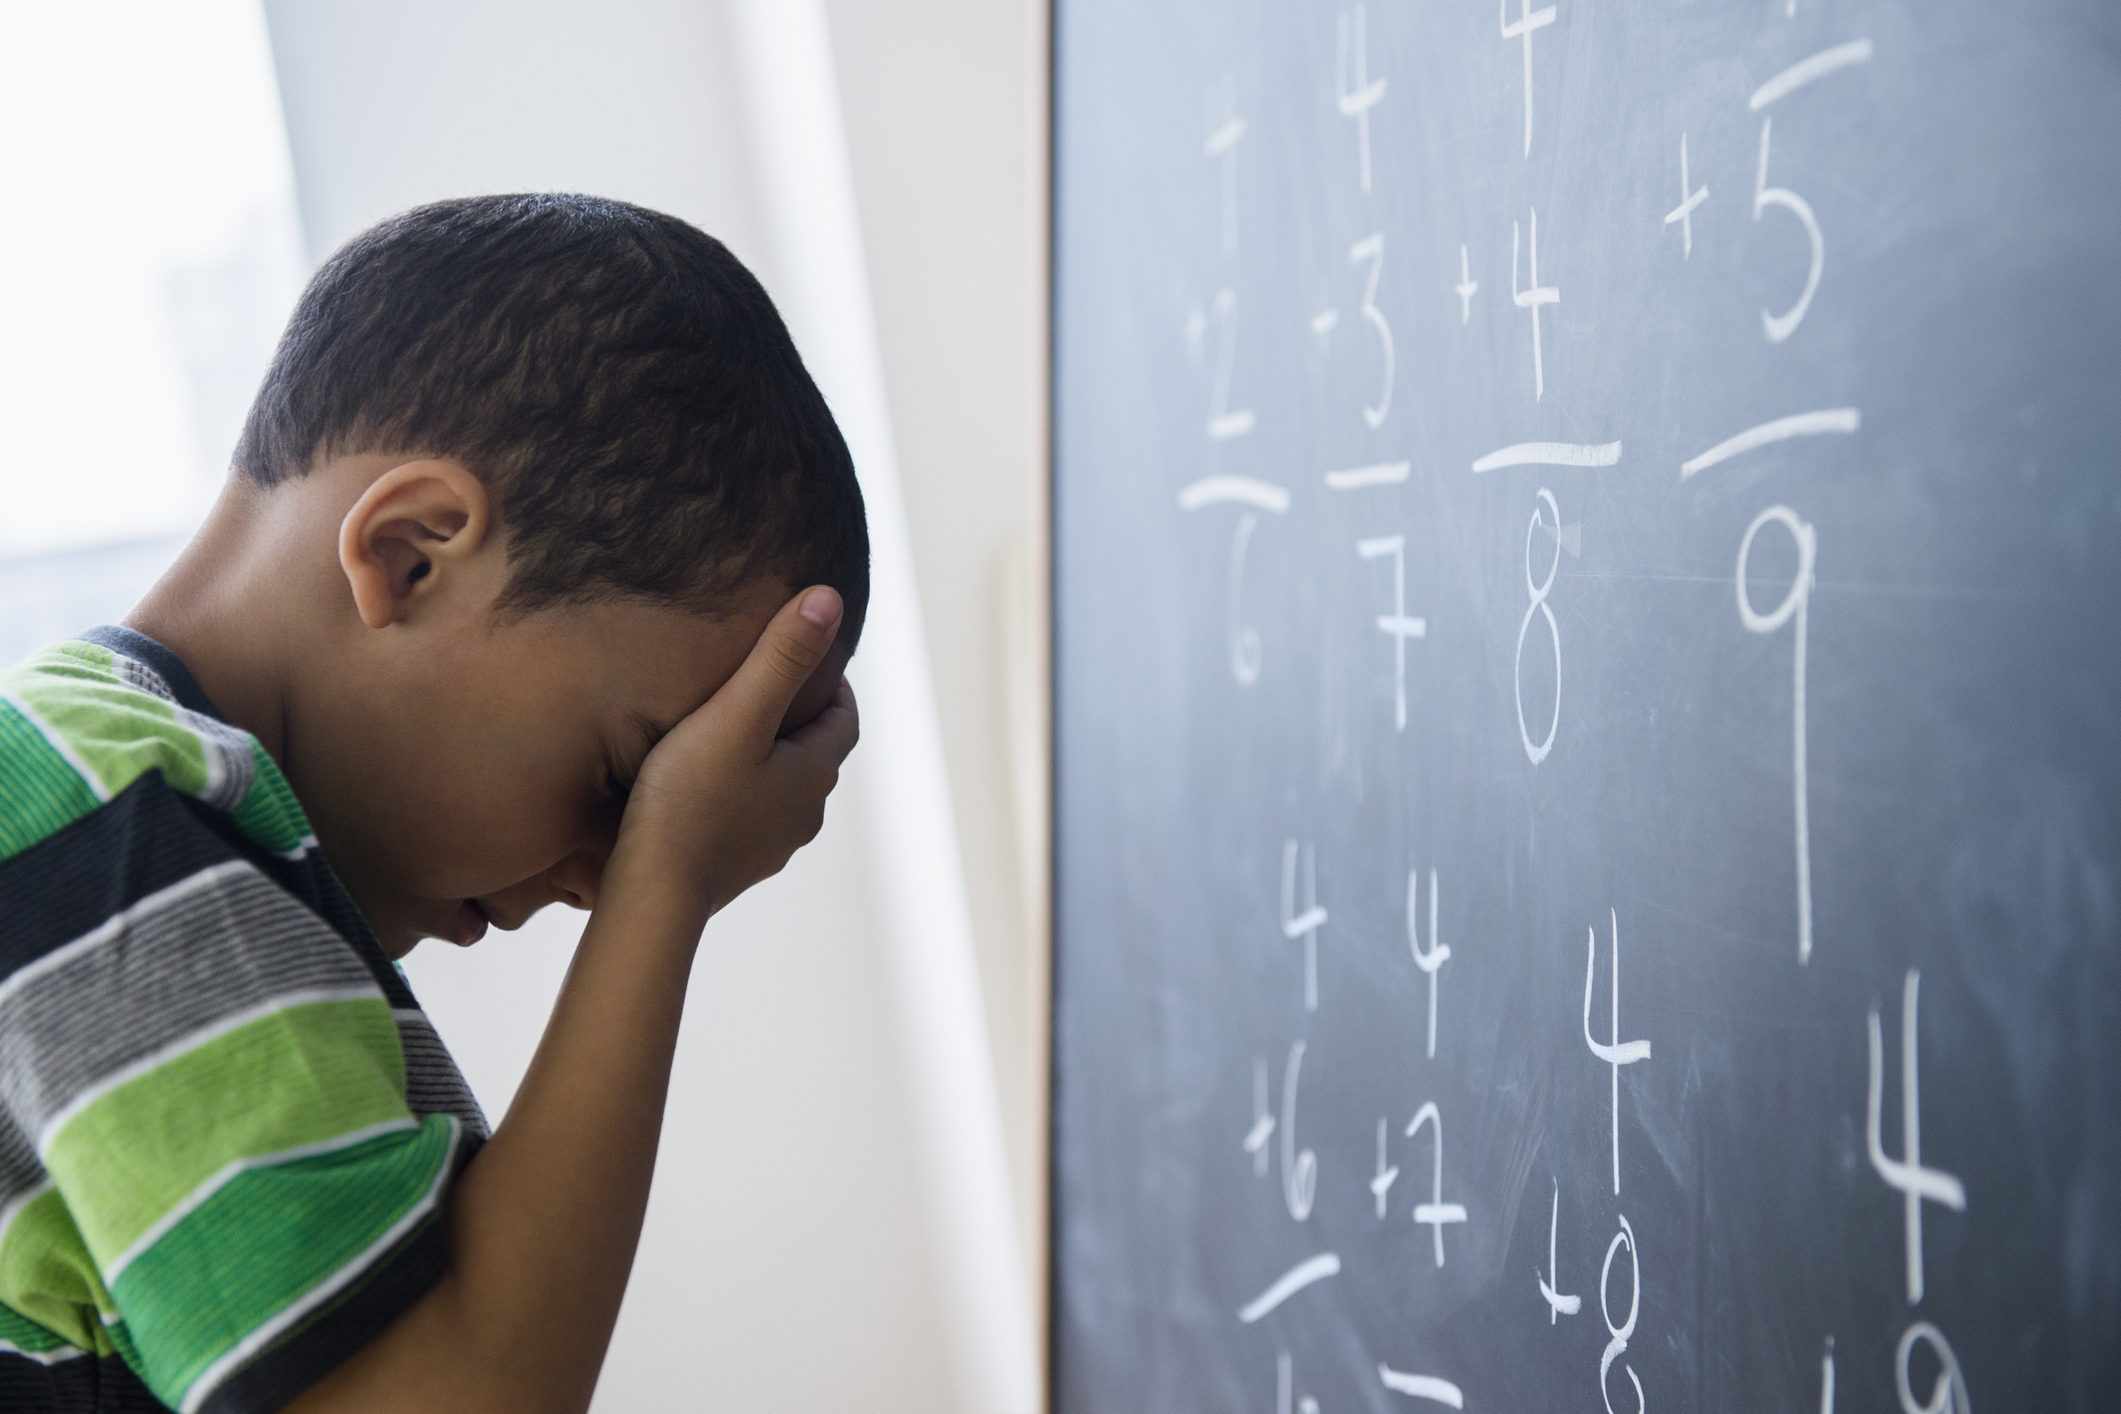 A child holding his head to his hand in front of a chalkboard with math on it